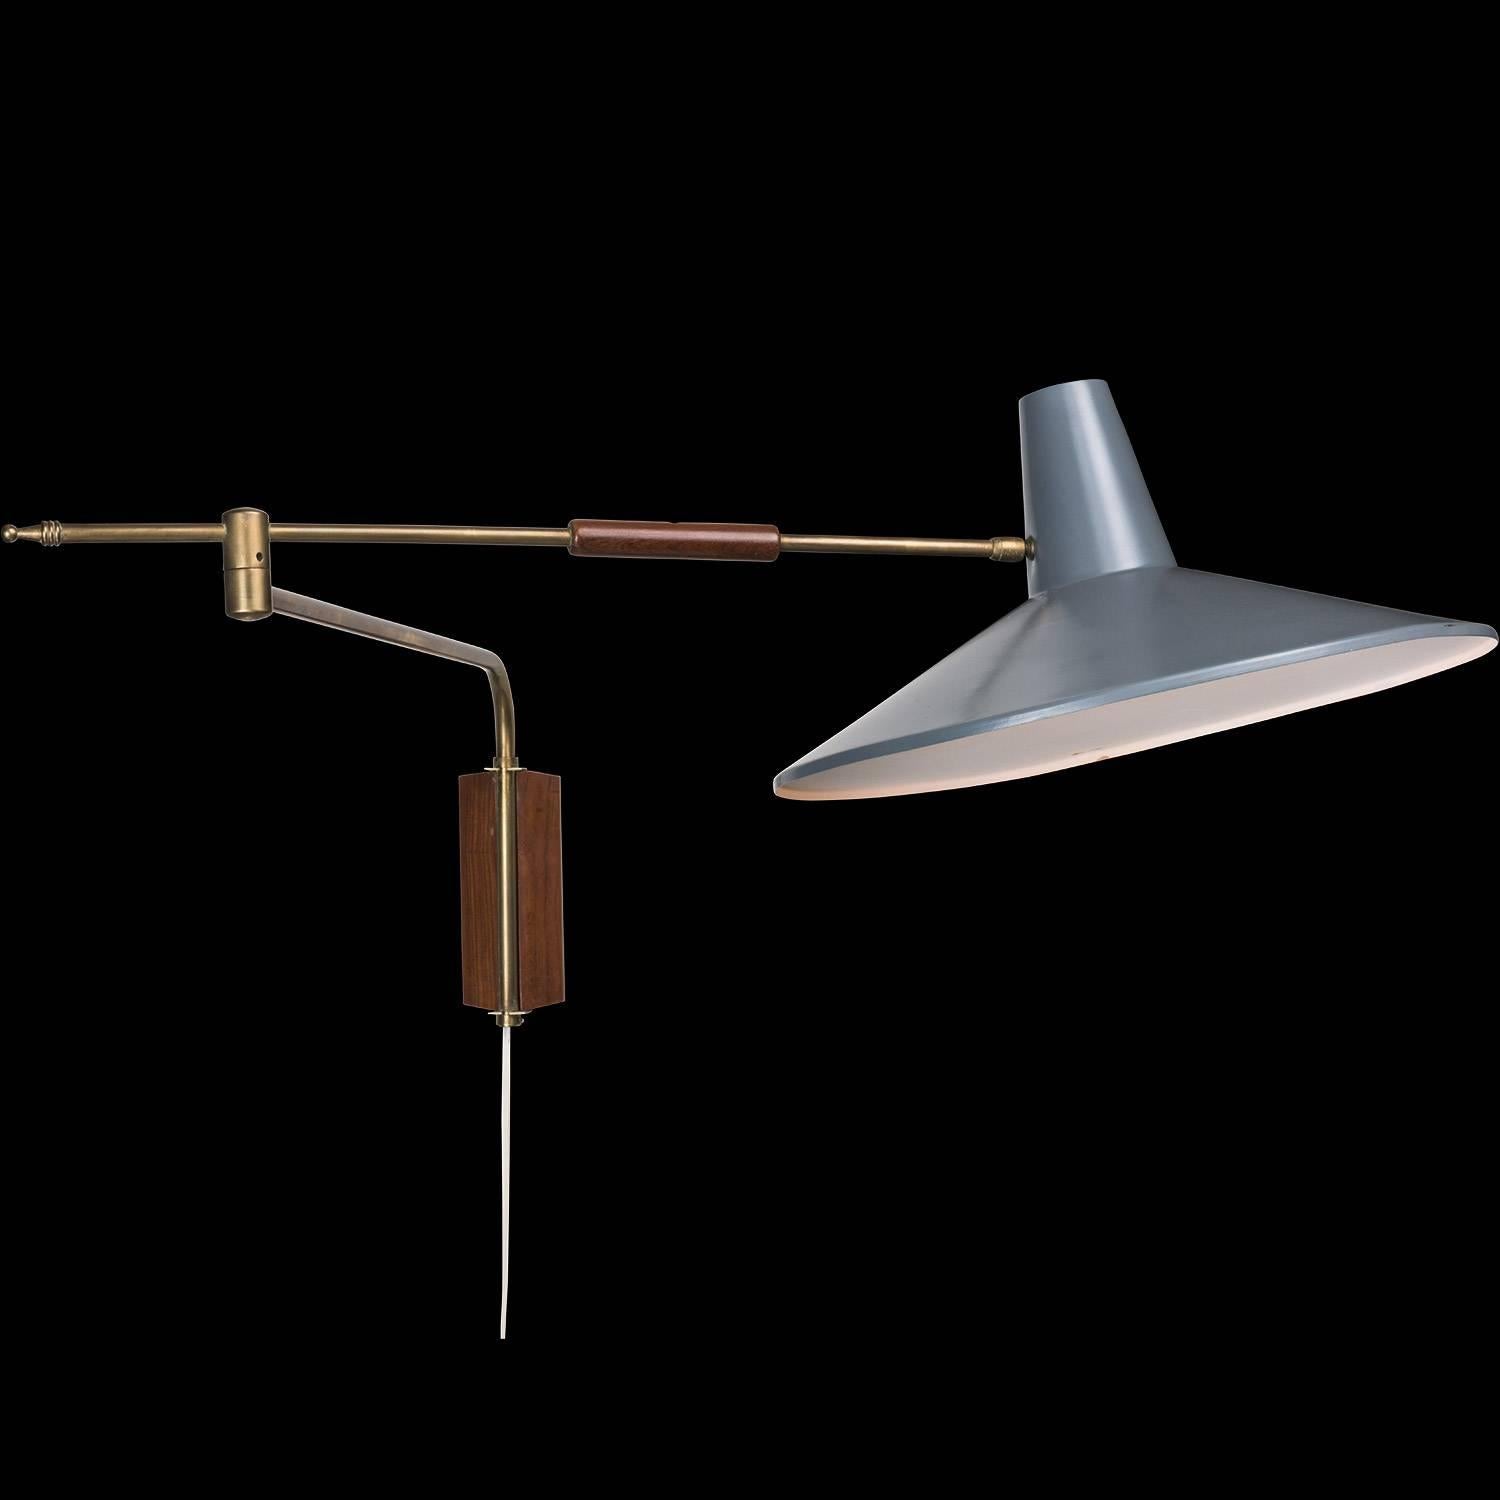 Brass and painted Metal Swing Arm Lamp, circa 1960.

Brass arm with mahogany details and bluish grey painted shade.